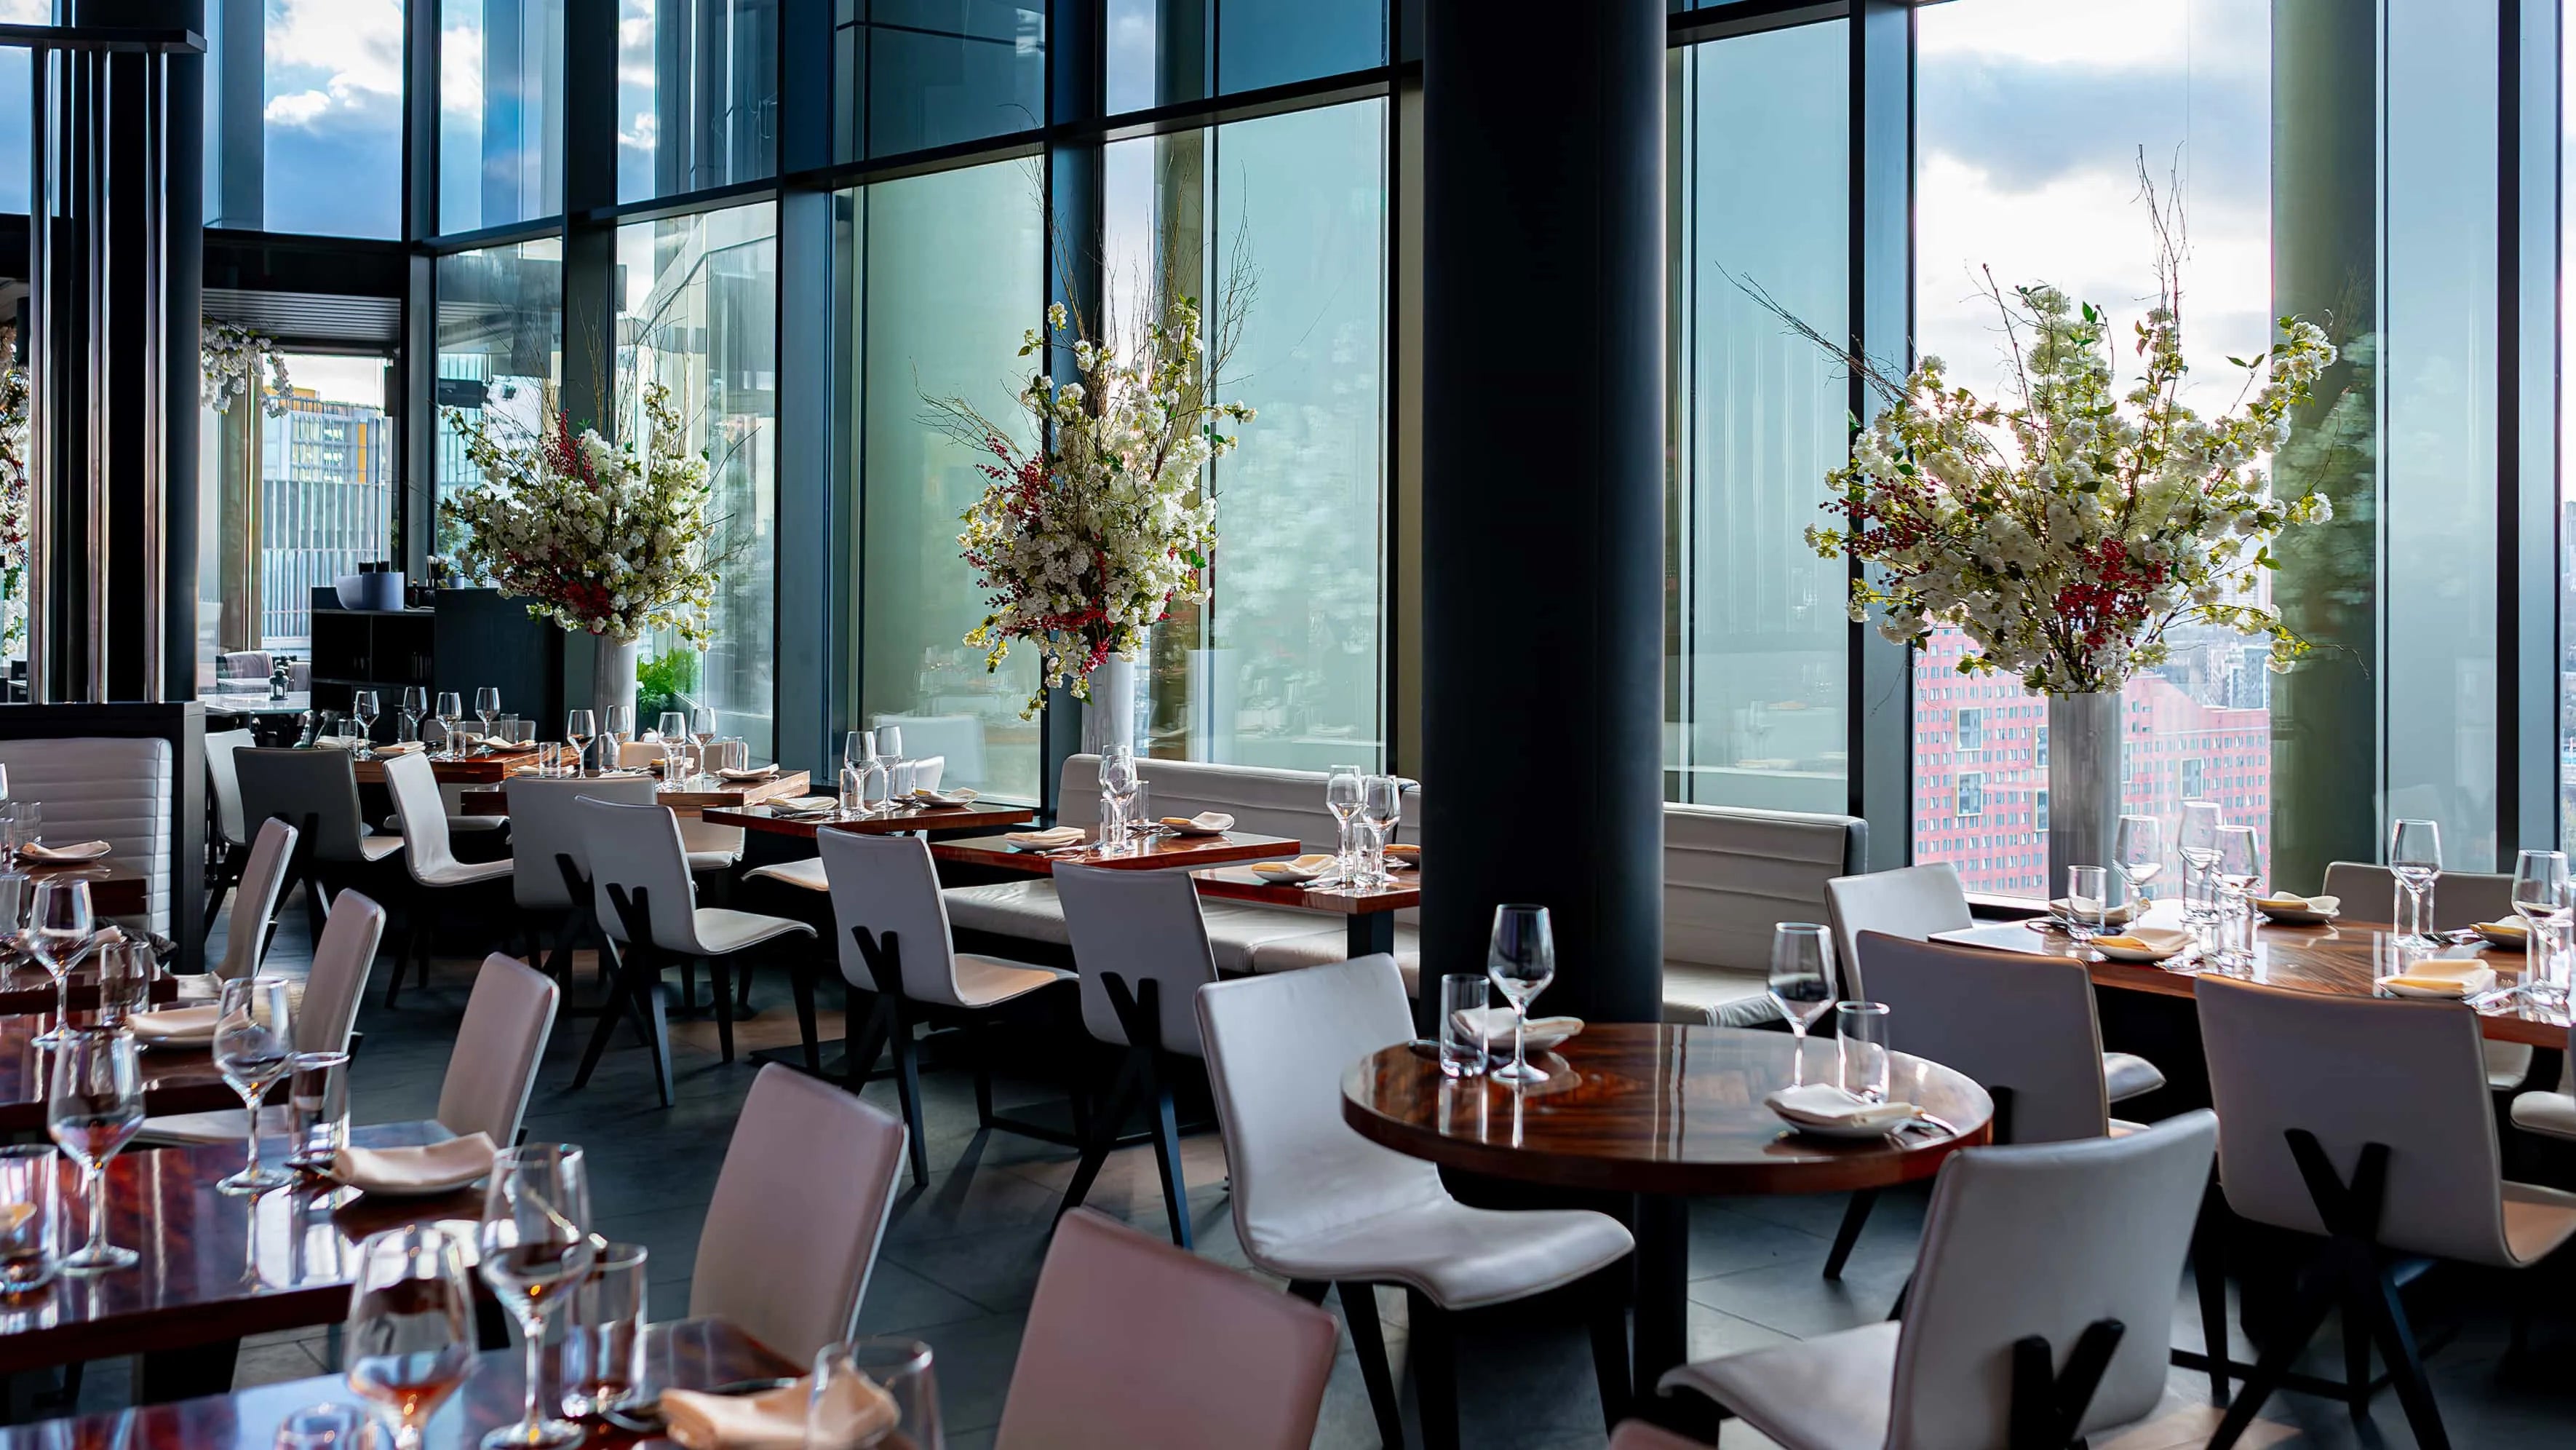 Spacious dining area at STK Steakhouse with elegantly set tables and large floral centrepieces, featuring white blossoms and red accents, beside floor-to-ceiling windows offering city views.